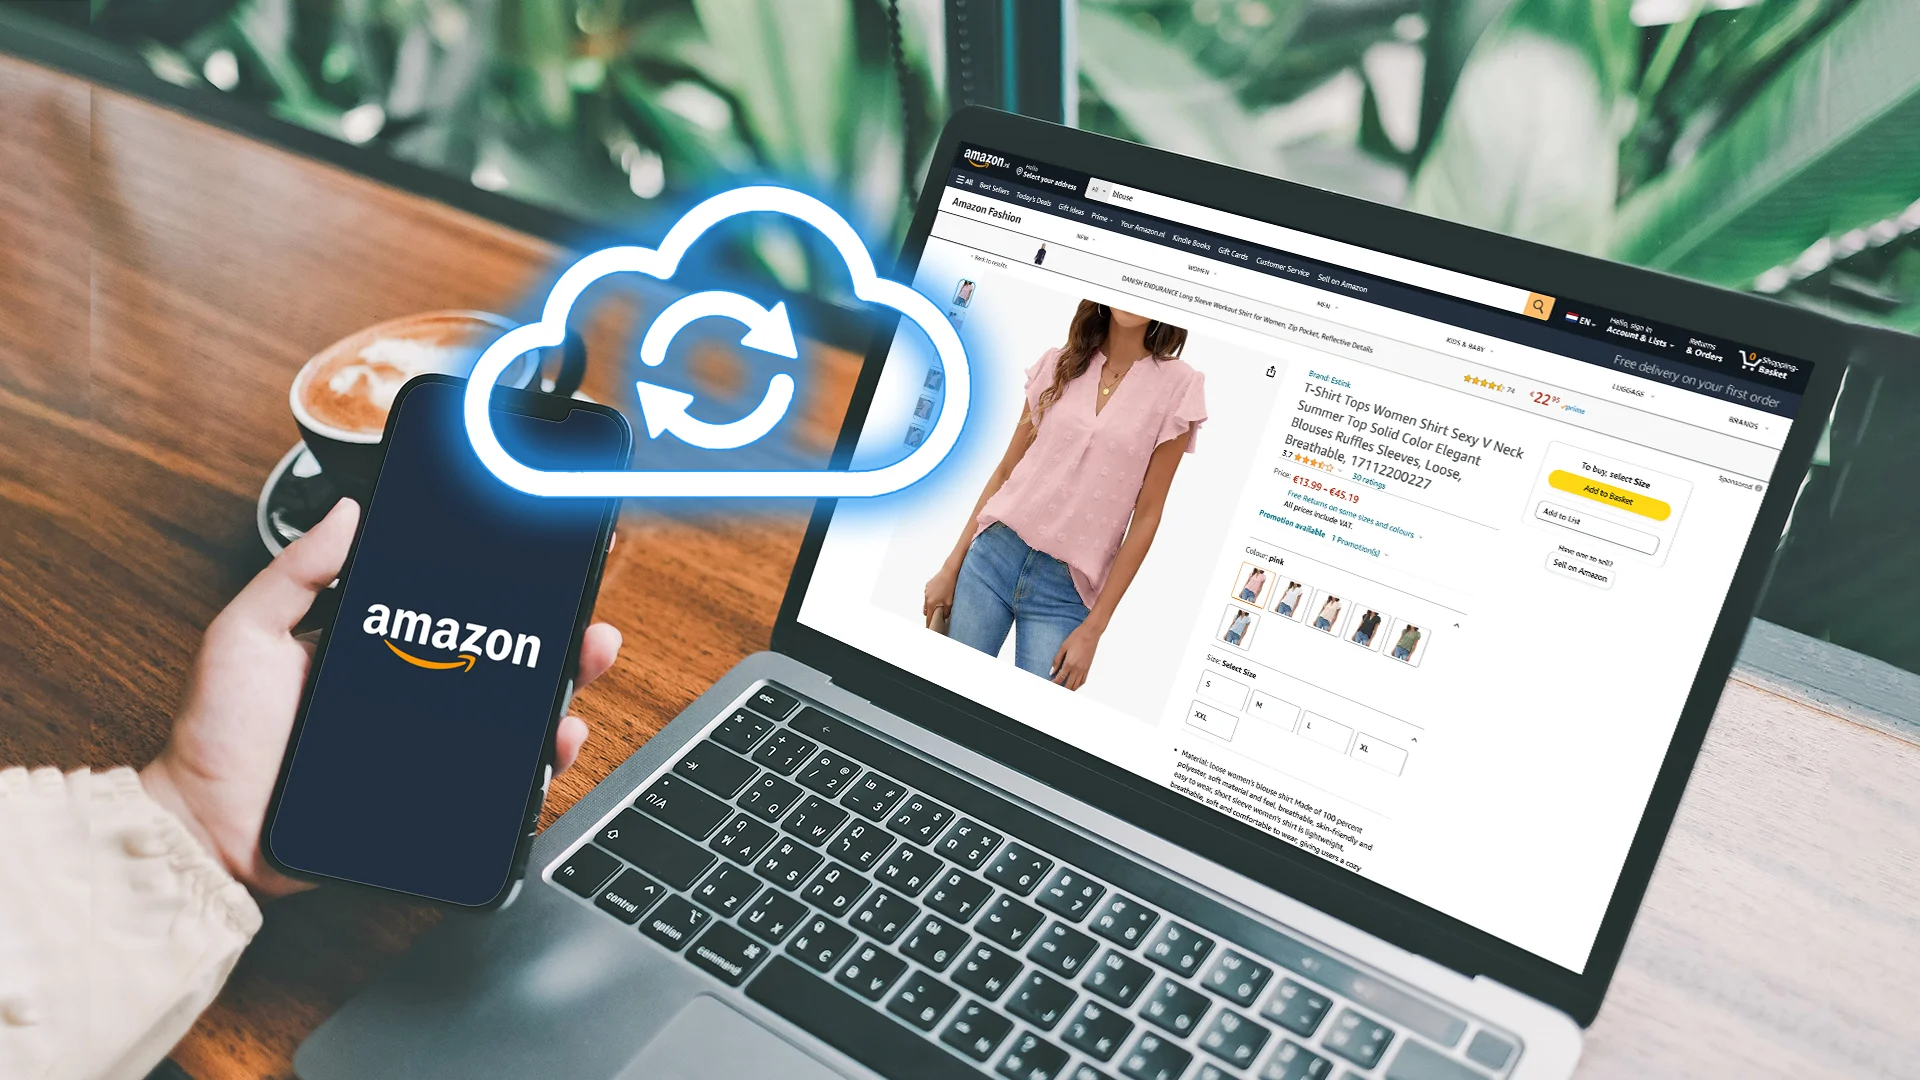 The best way to optimise your Amazon review process is to automate it